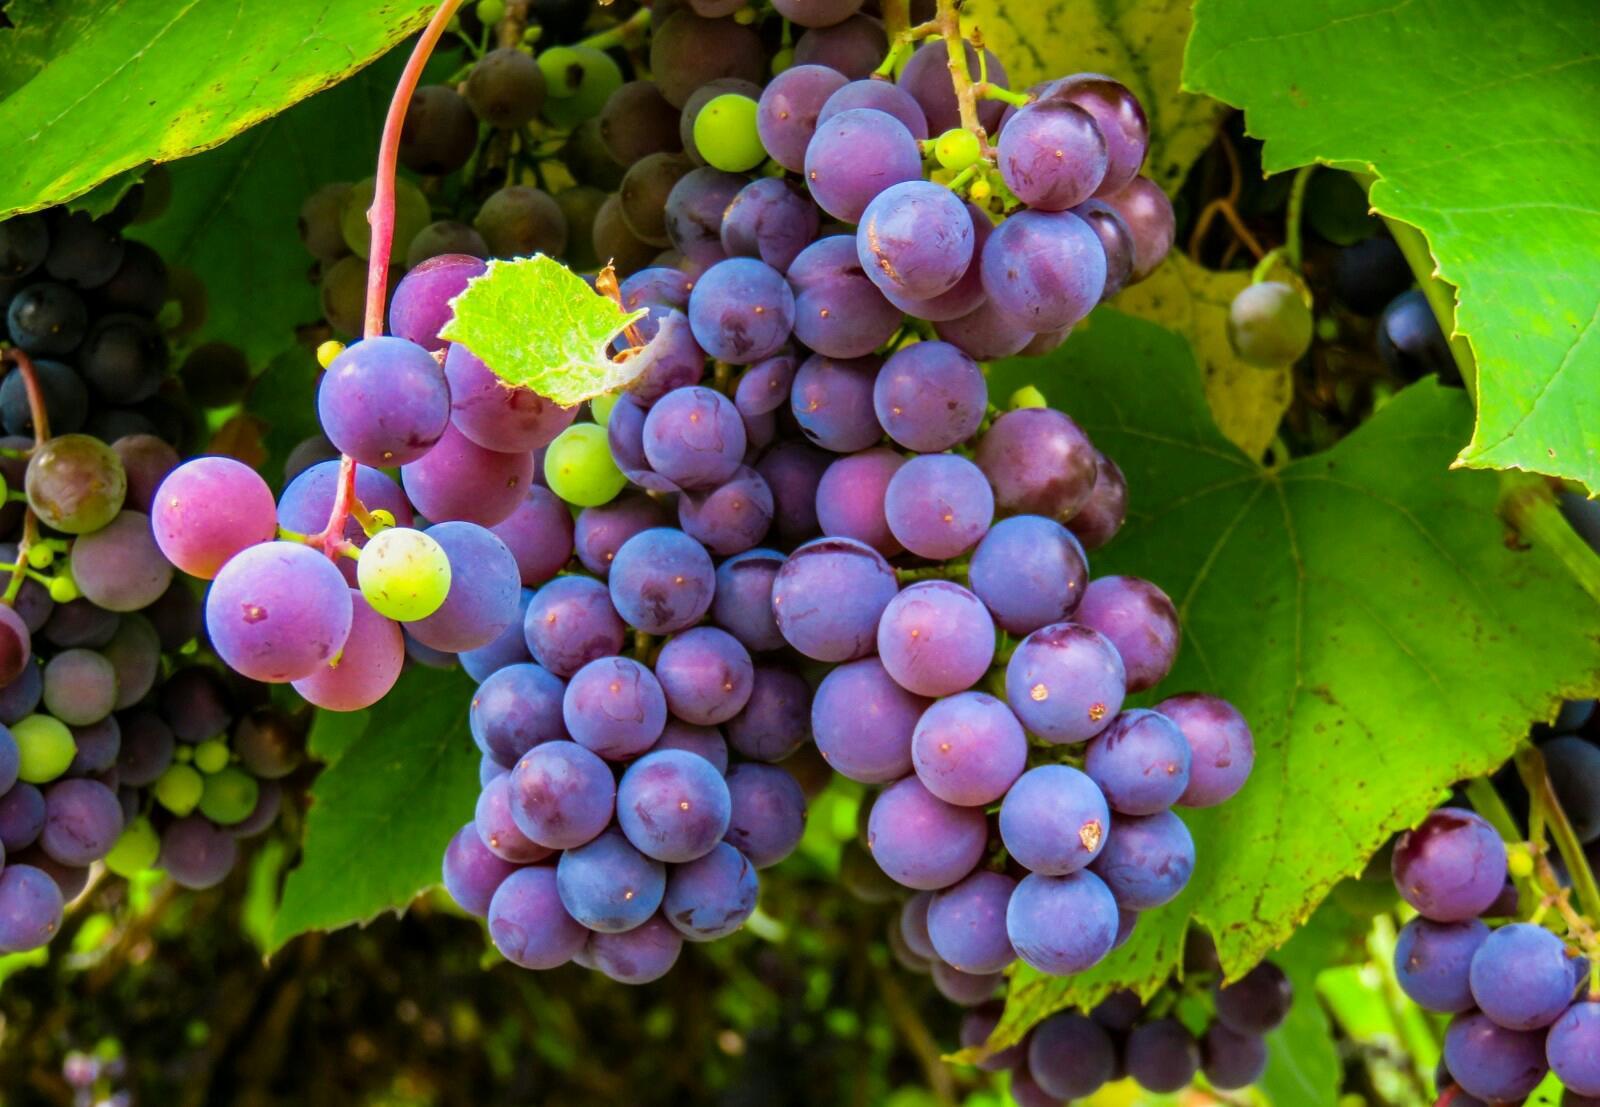 Grapes excellent ** wallpaper in 2018.Images.Wishes